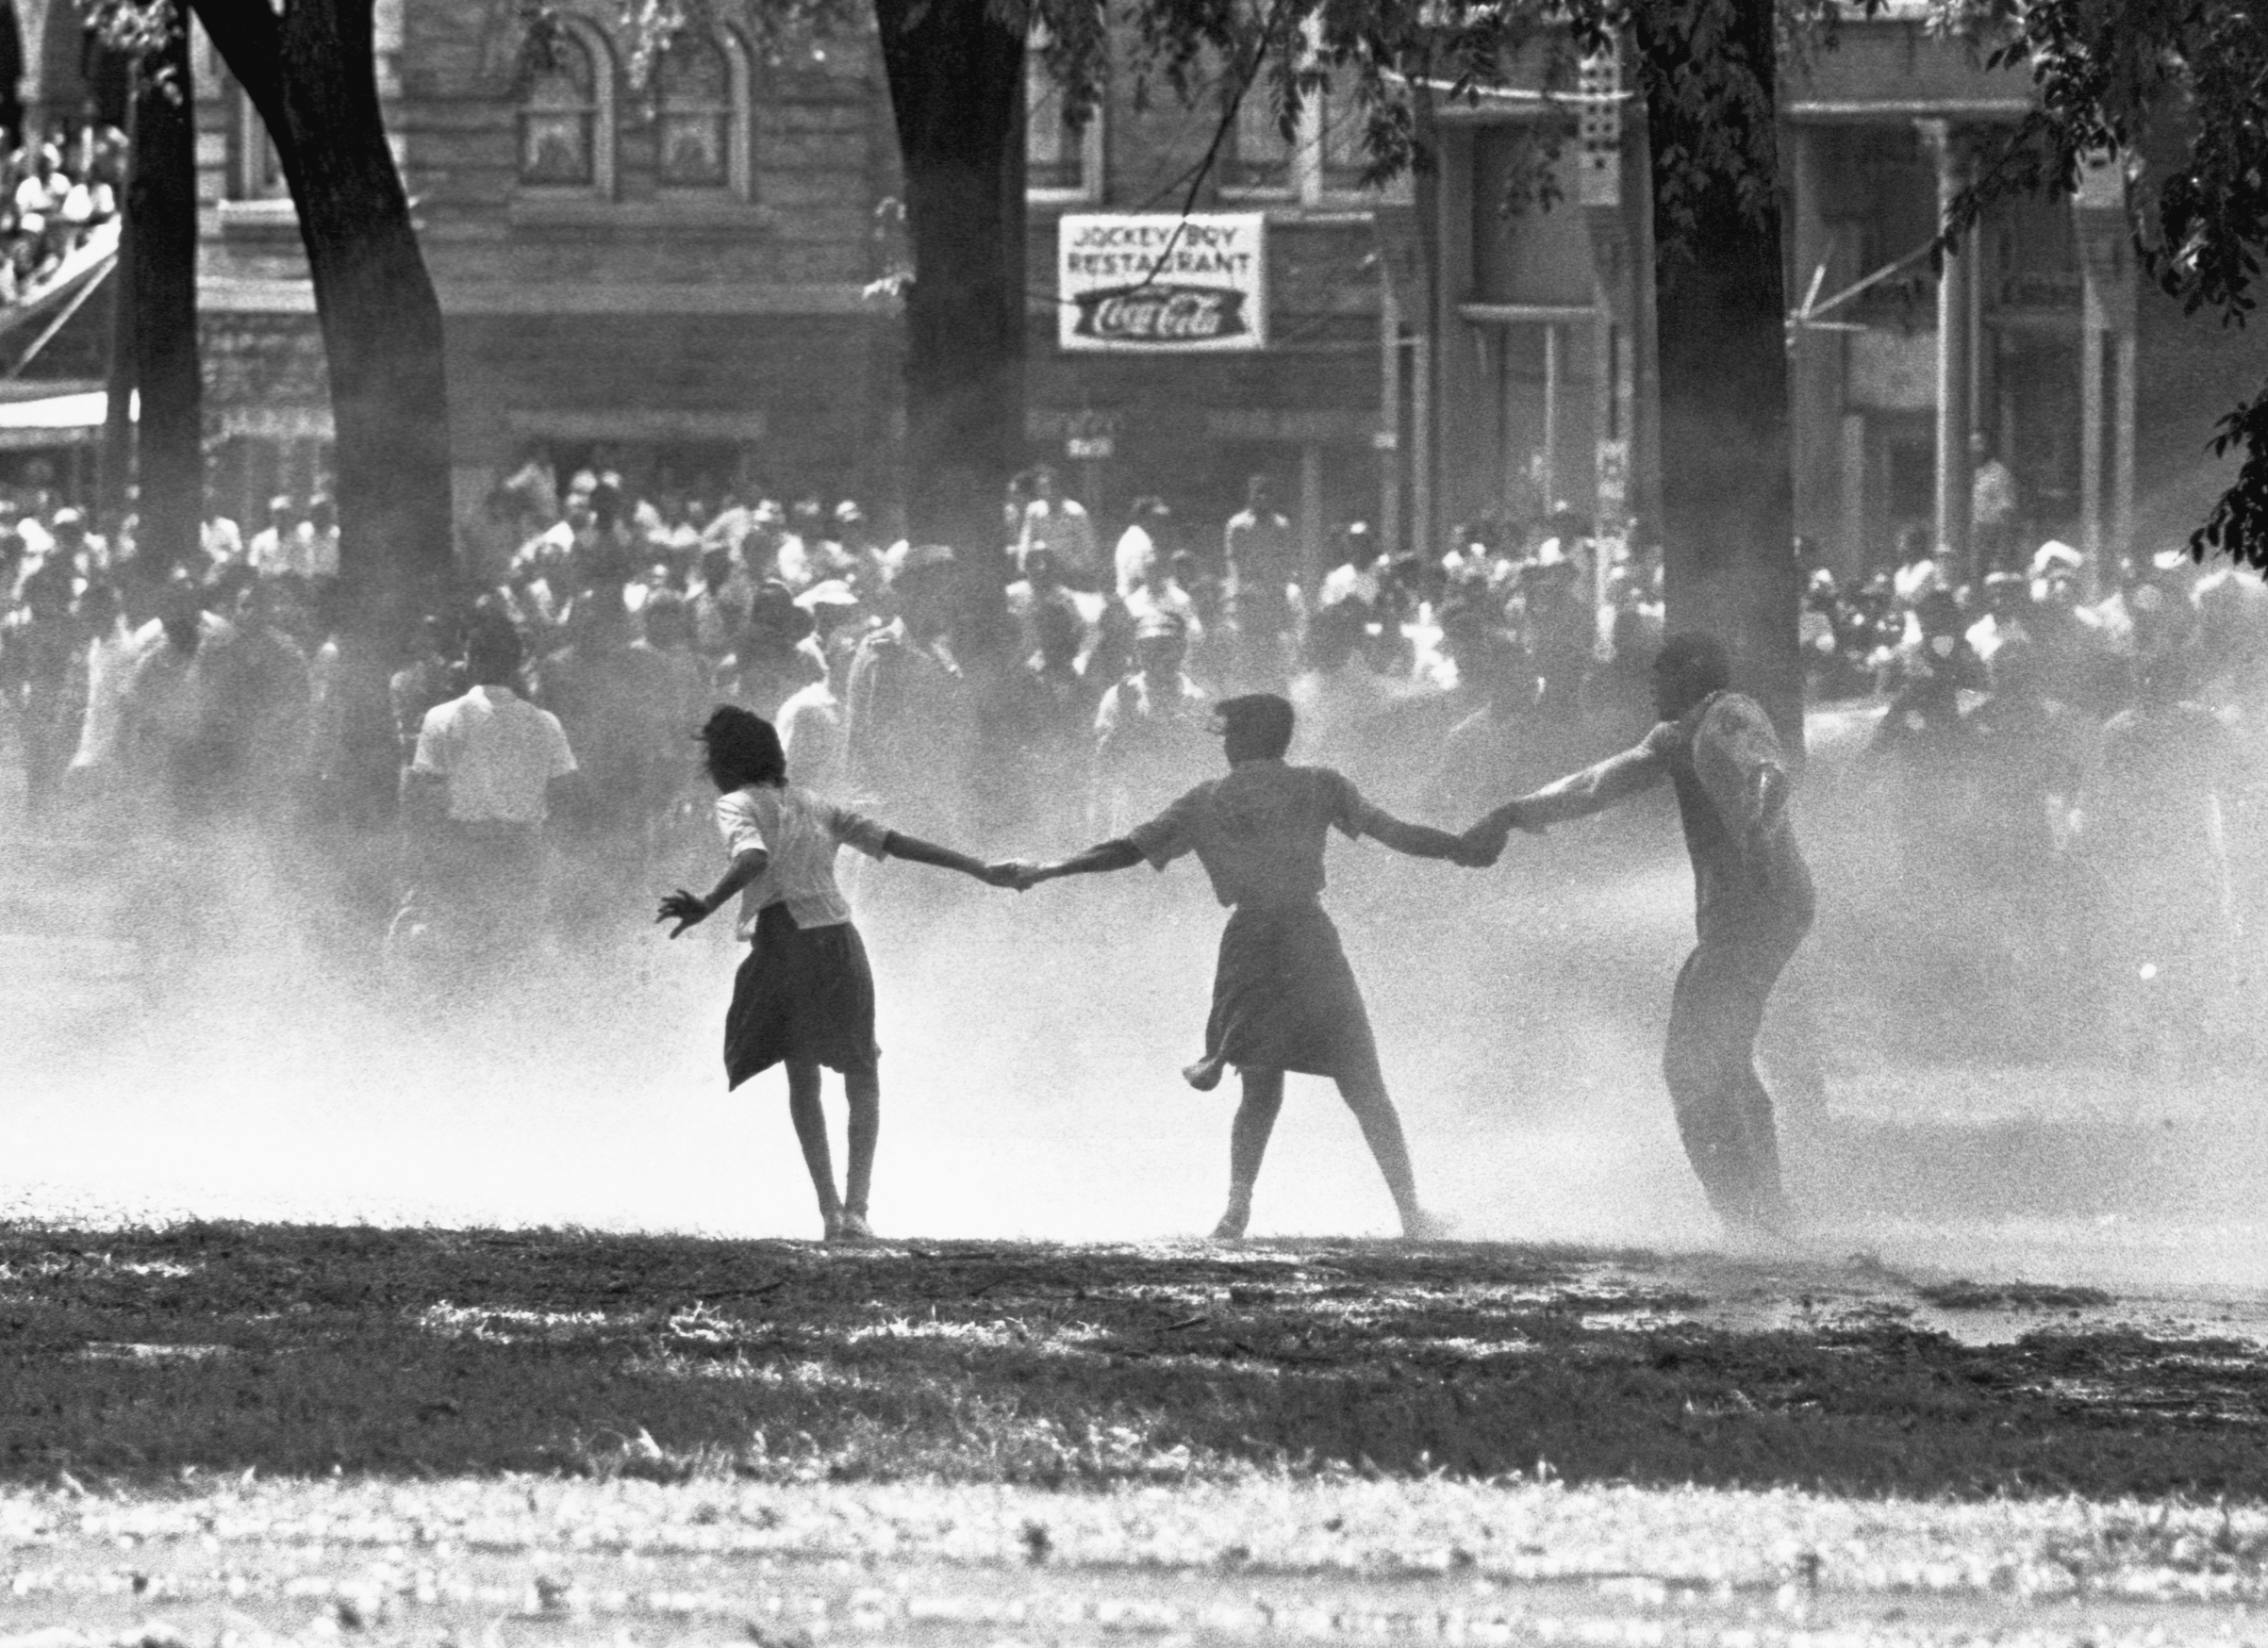 Three demonstrators join hands to build strength against the force of water sprayed by riot police in Birmingham, Alabama, during a protest of segregation practices in May of 1963. (Bettmann / Getty Images)